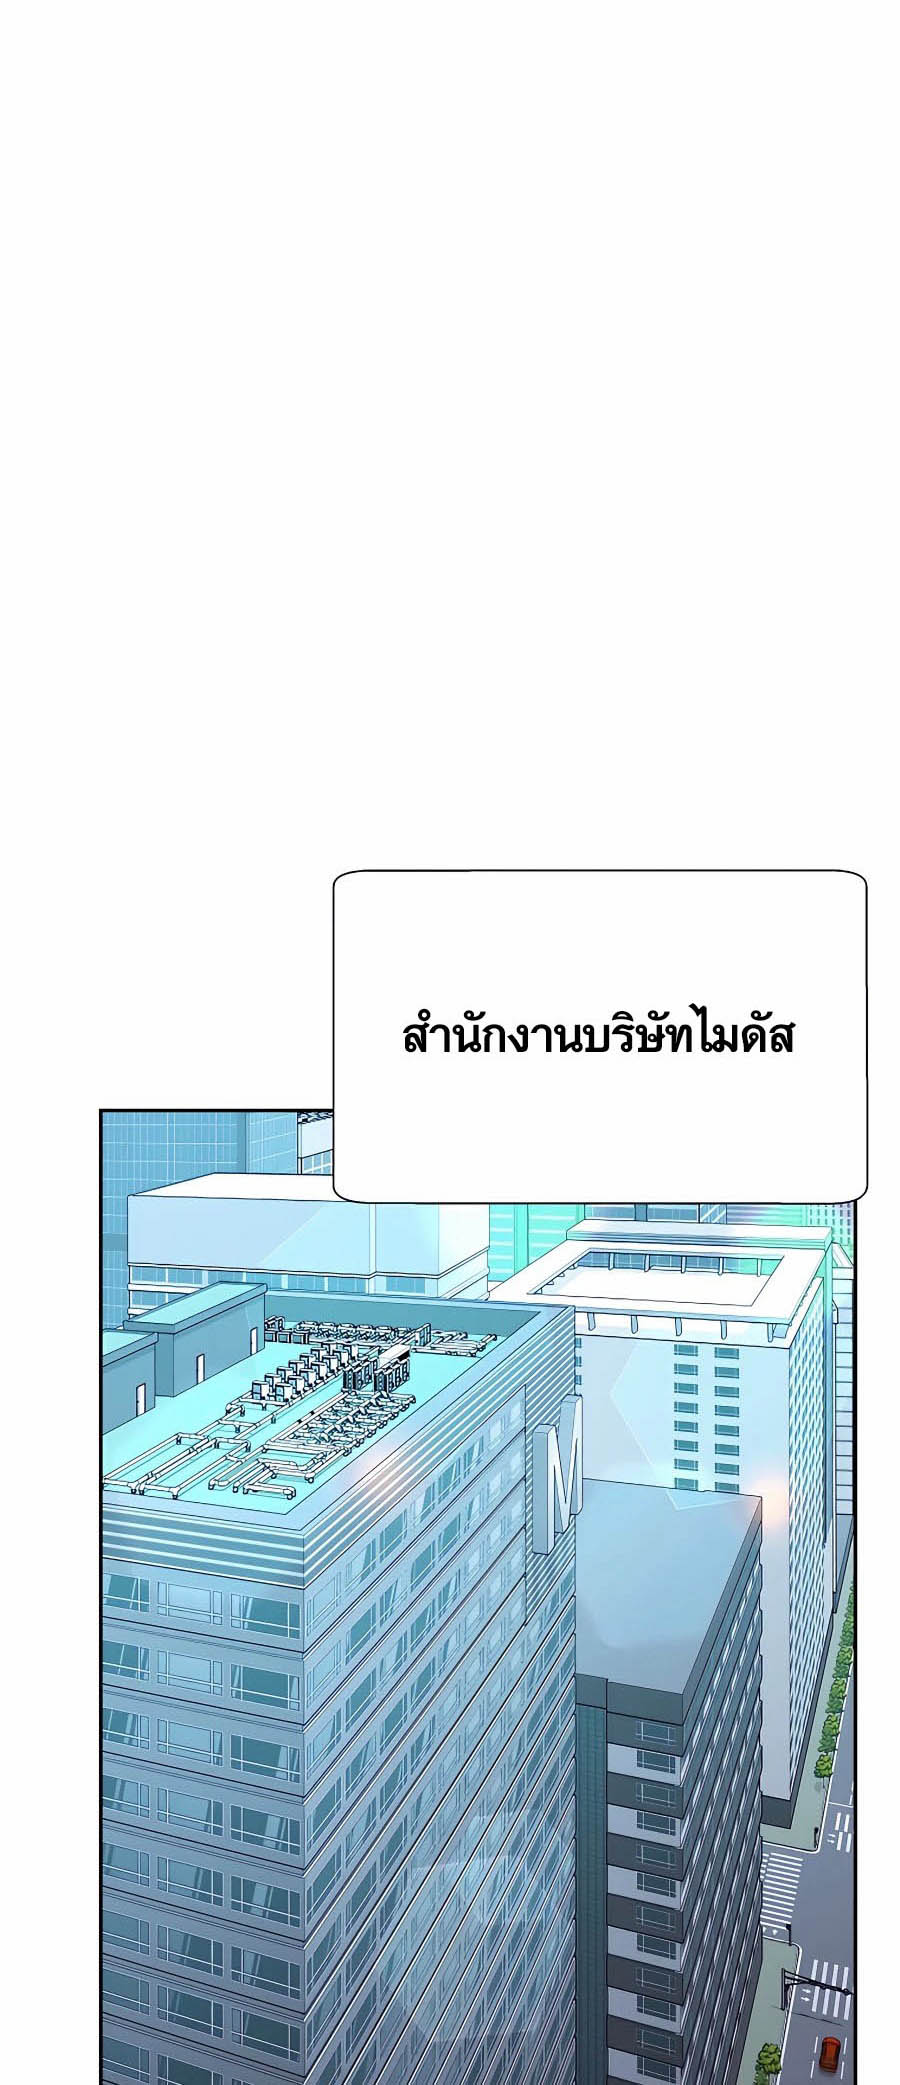 à¸­à¹ˆà¸²à¸™à¸¡à¸±à¸™à¸®à¸§à¸² à¹€à¸£à¸·à¹ˆà¸­à¸‡ The Part Time Land of the Gods 56 14